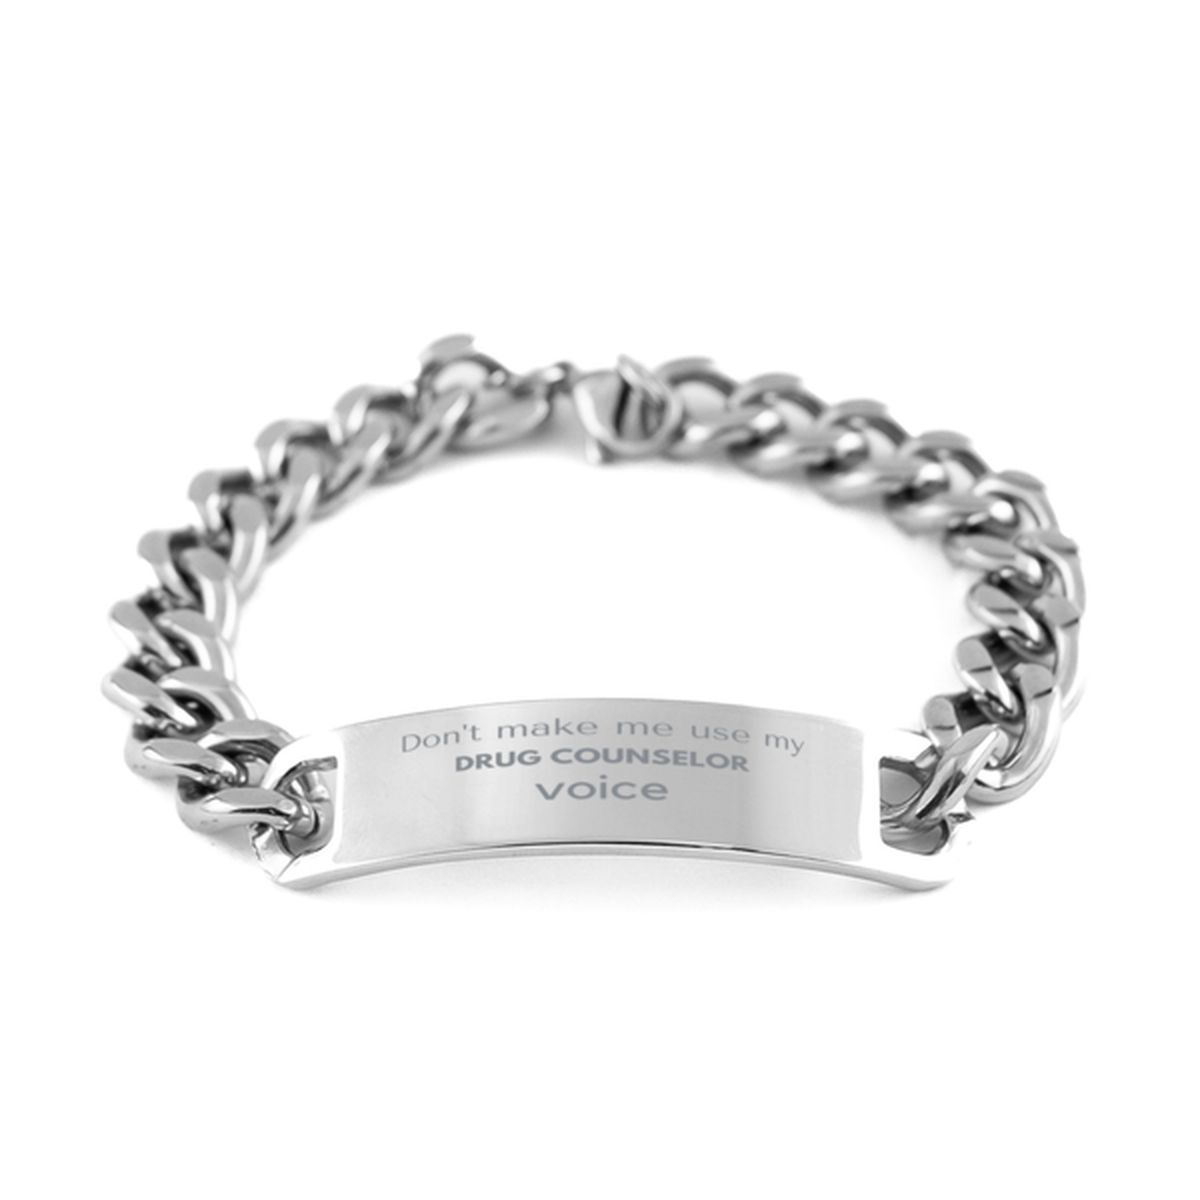 Don't make me use my Drug Counselor voice, Sarcasm Drug Counselor Gifts, Christmas Drug Counselor Cuban Chain Stainless Steel Bracelet Birthday Unique Gifts For Drug Counselor Coworkers, Men, Women, Colleague, Friends